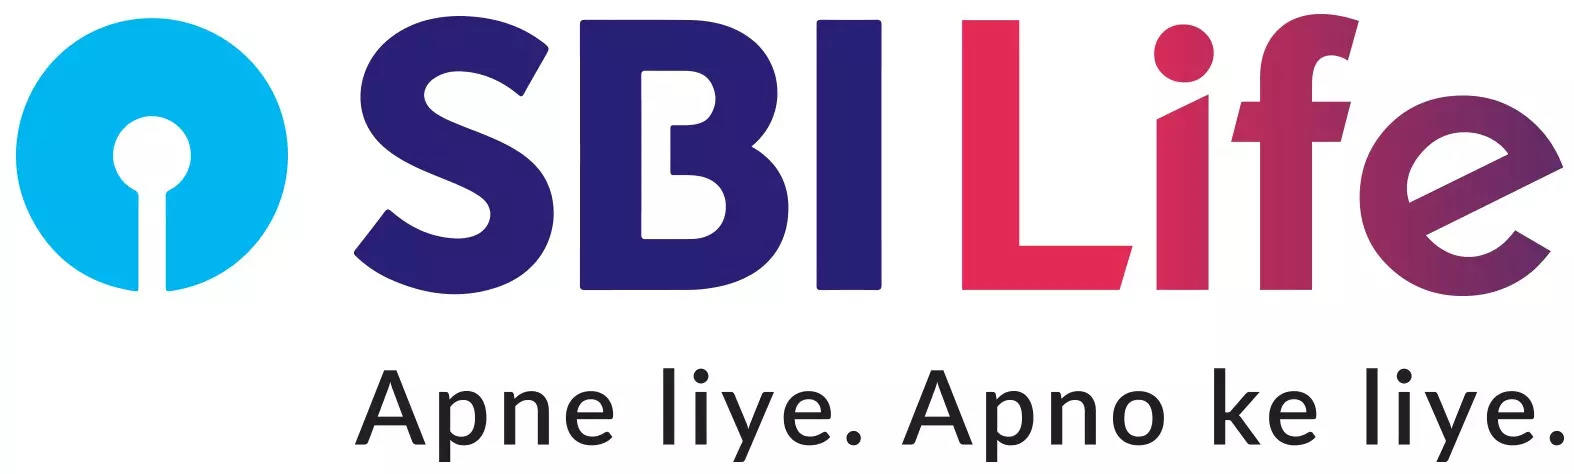 SBI Life Insurance Company Stocks Live Updates: SBI Life Insurance Closes at Rs 1443.25 with 753 Shares Traded, 7-Day Avg Volume Reaches 1,249,878 